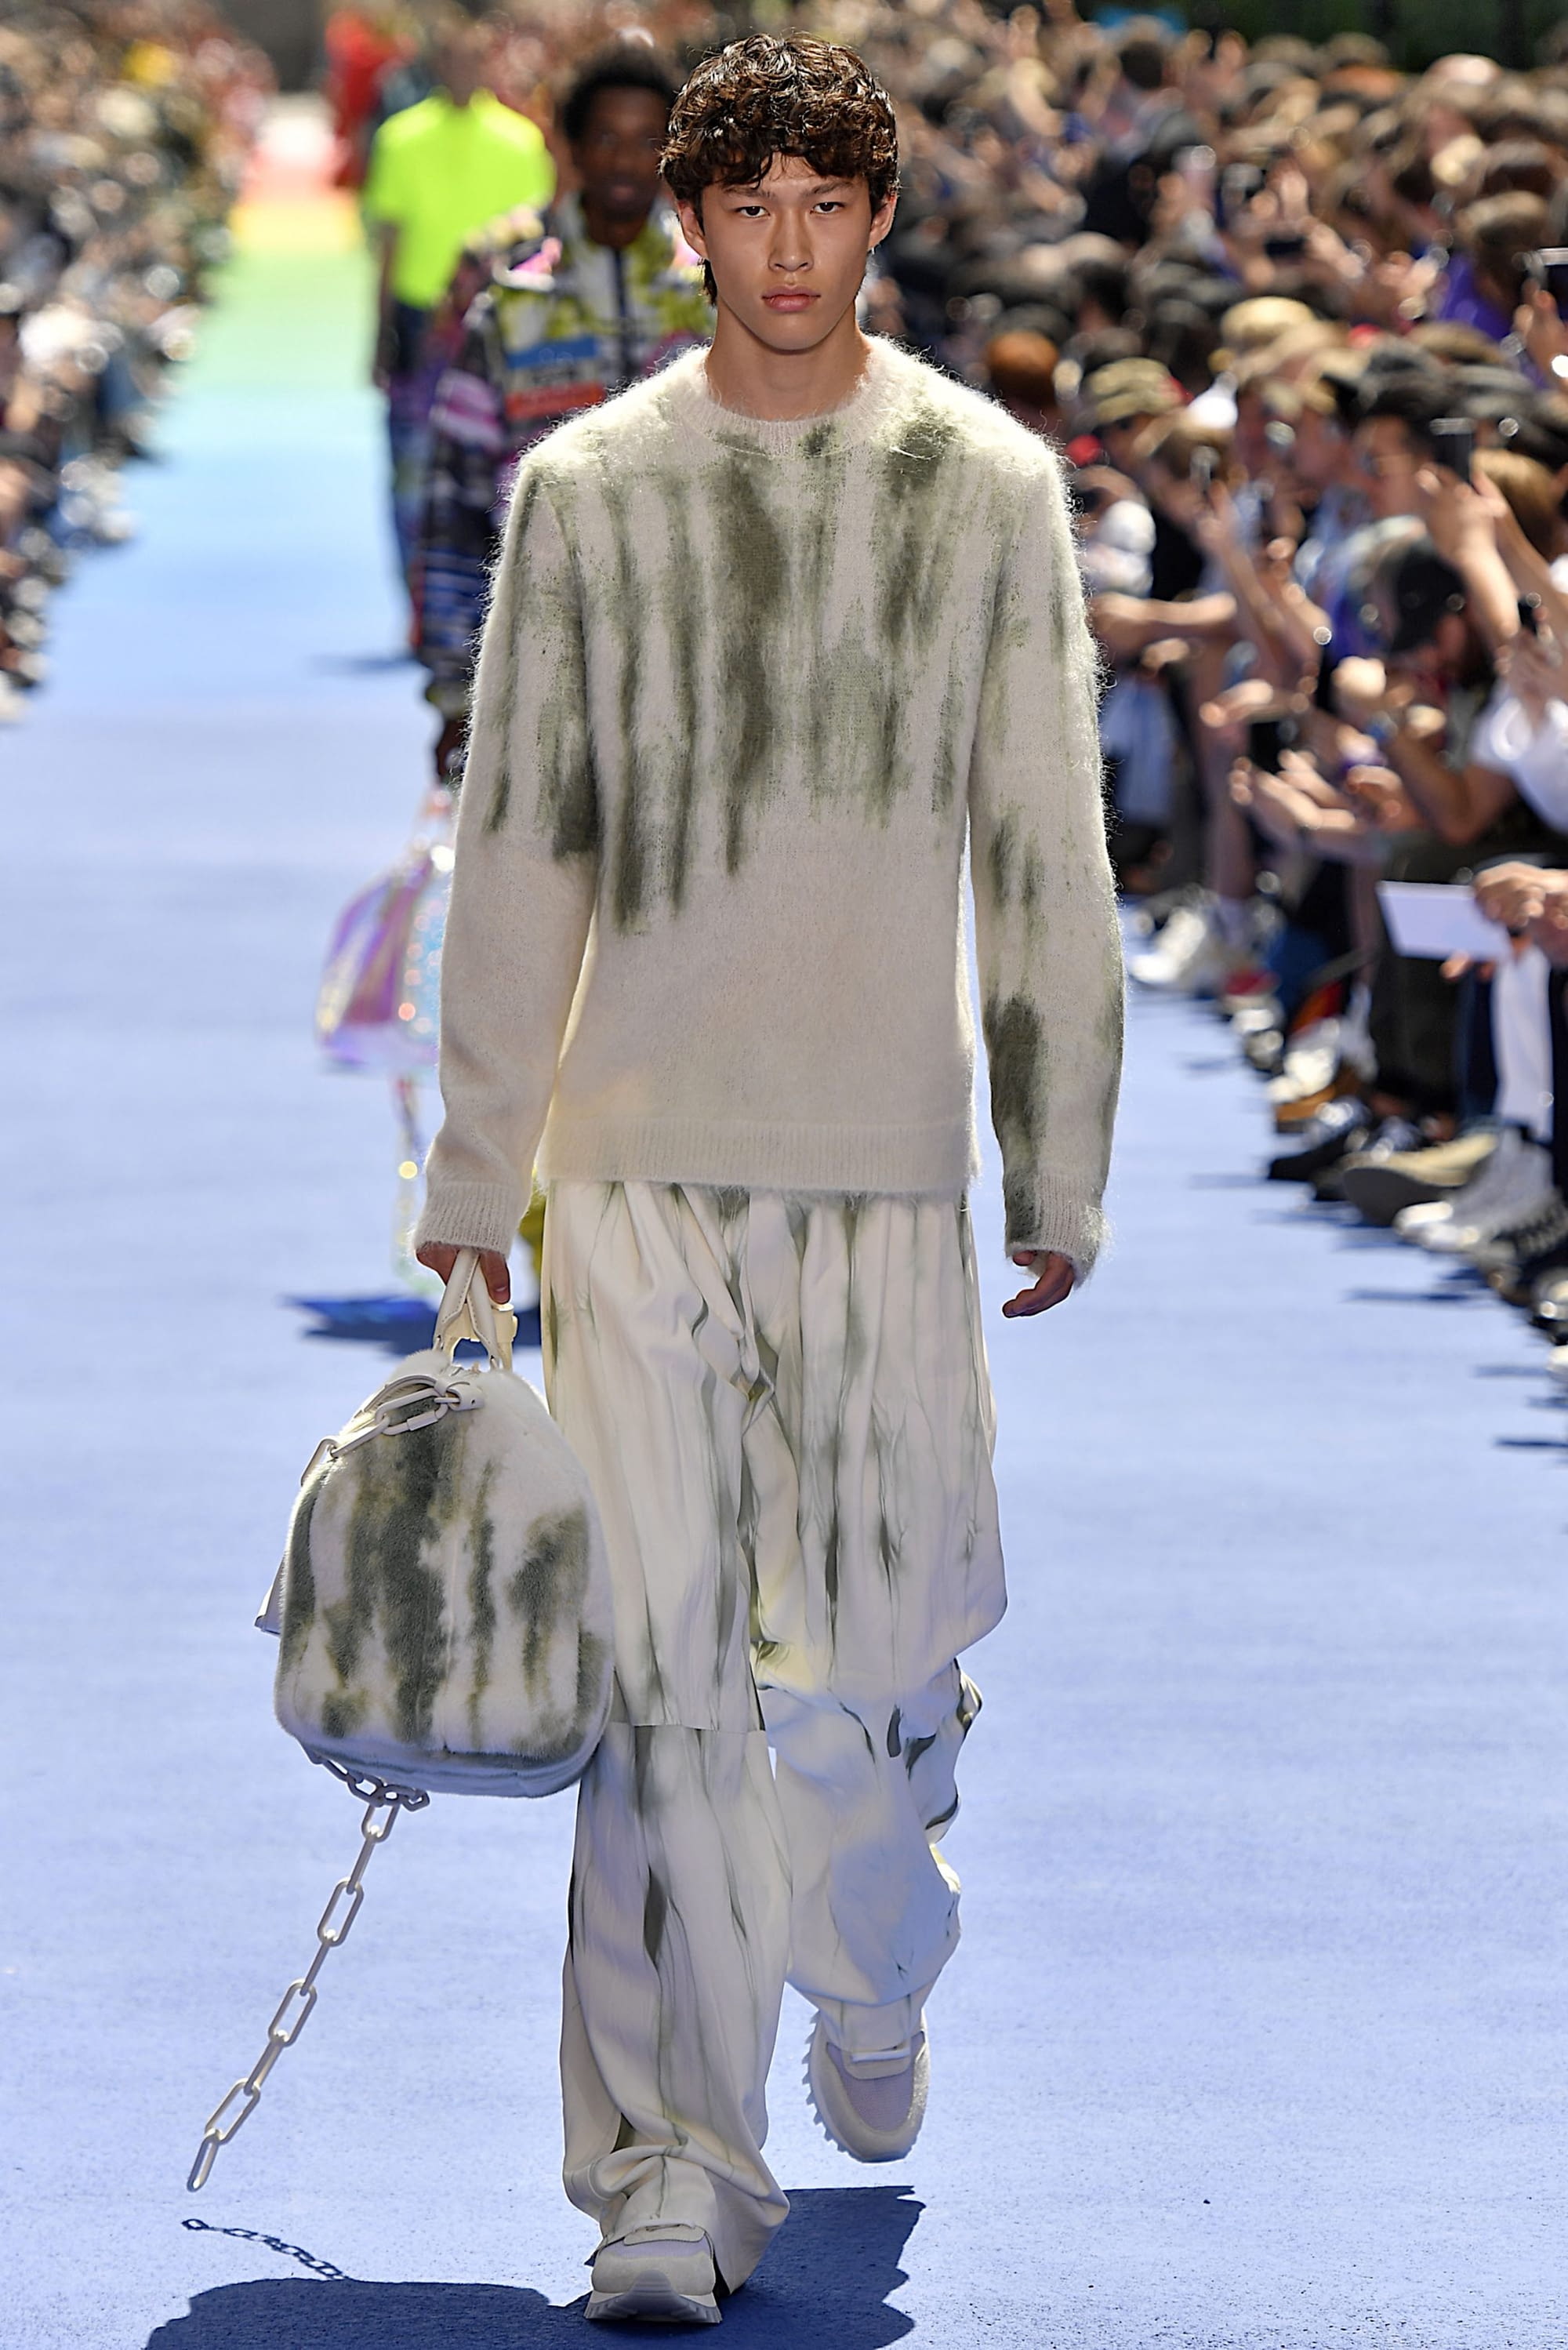 Louis Vuitton 2019 Spring Summer Mens Collection  Denim Jeans Fashion Week  Runway Catwalks, Fashion Shows, Season Collections Lookbooks > Fashion  Forward Curation < Trendcast Trendsetting Forecast Styles Spring Summer  Fall Autumn Winter Designer Brands